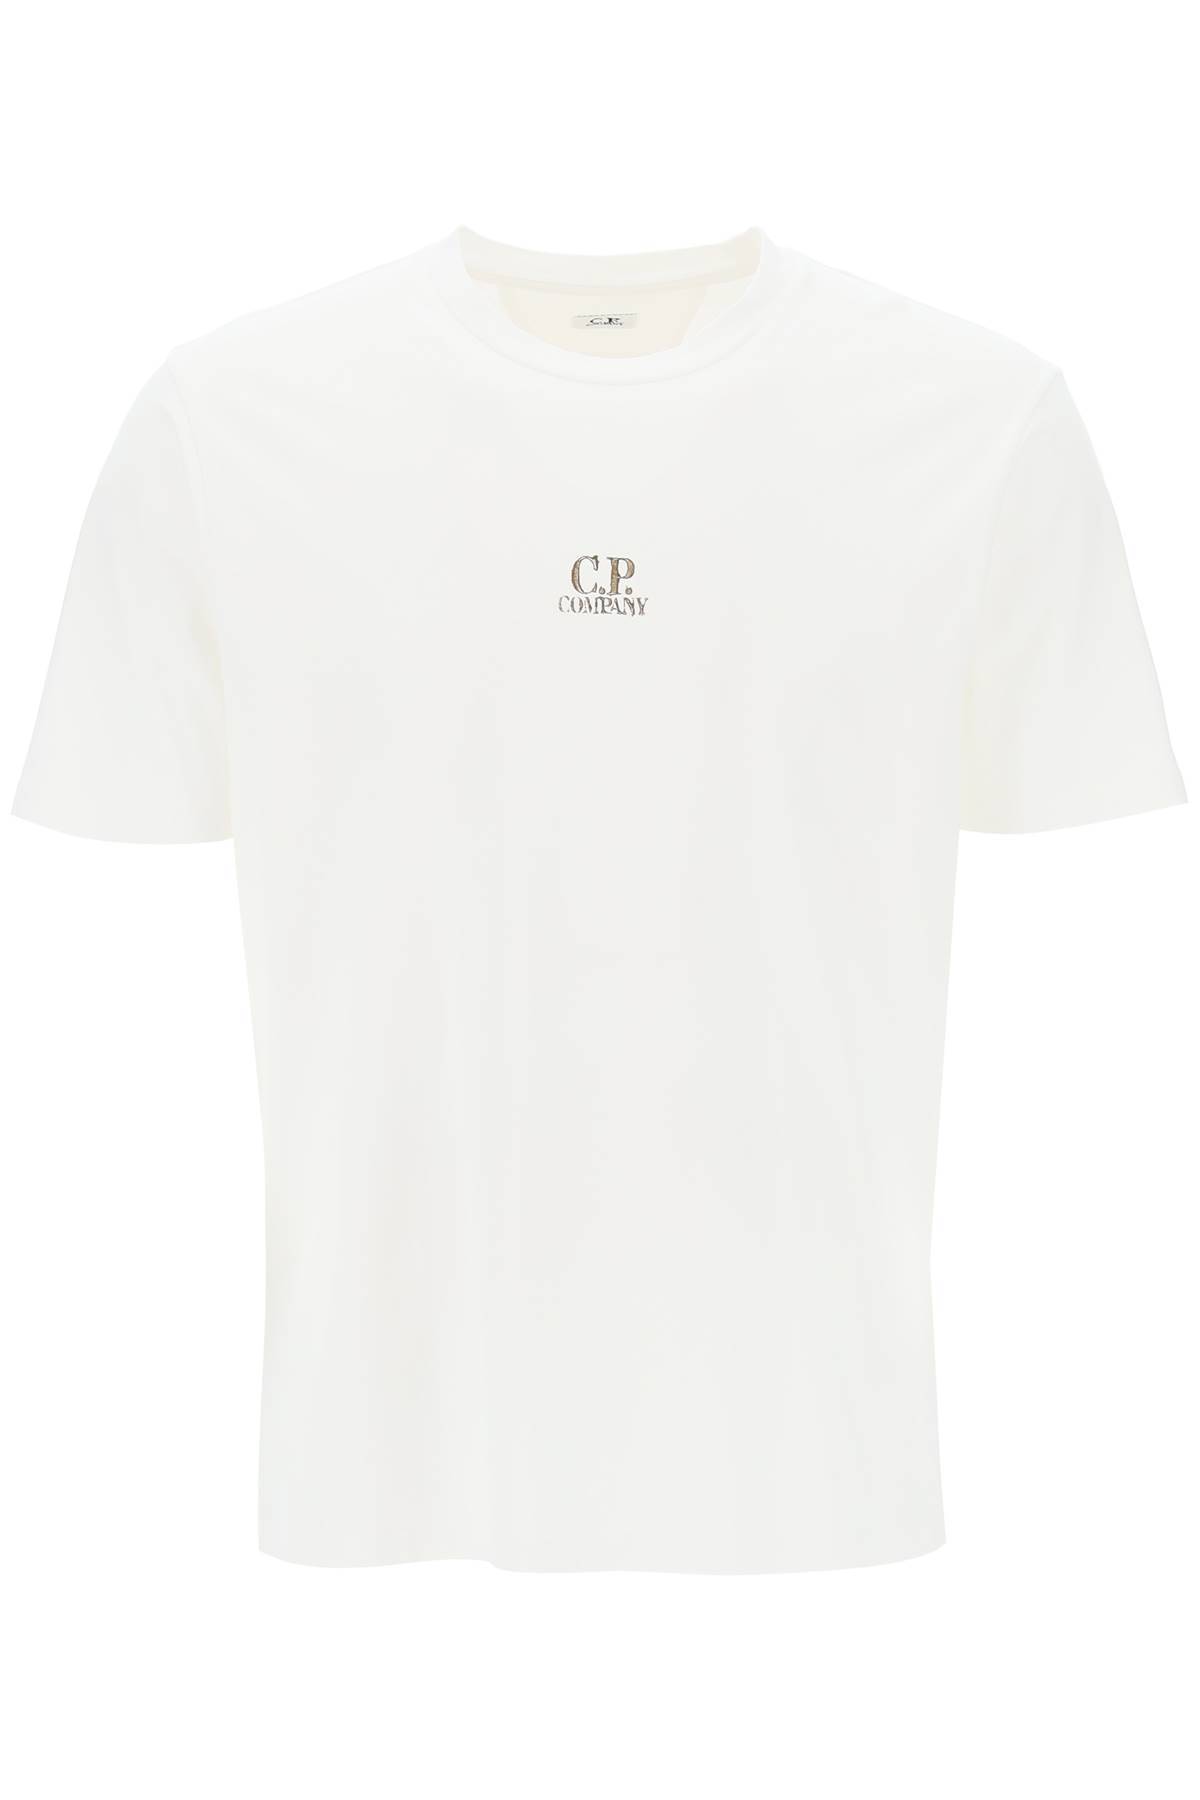 CP COMPANY CP COMPANY british sailor printed t-shirt with